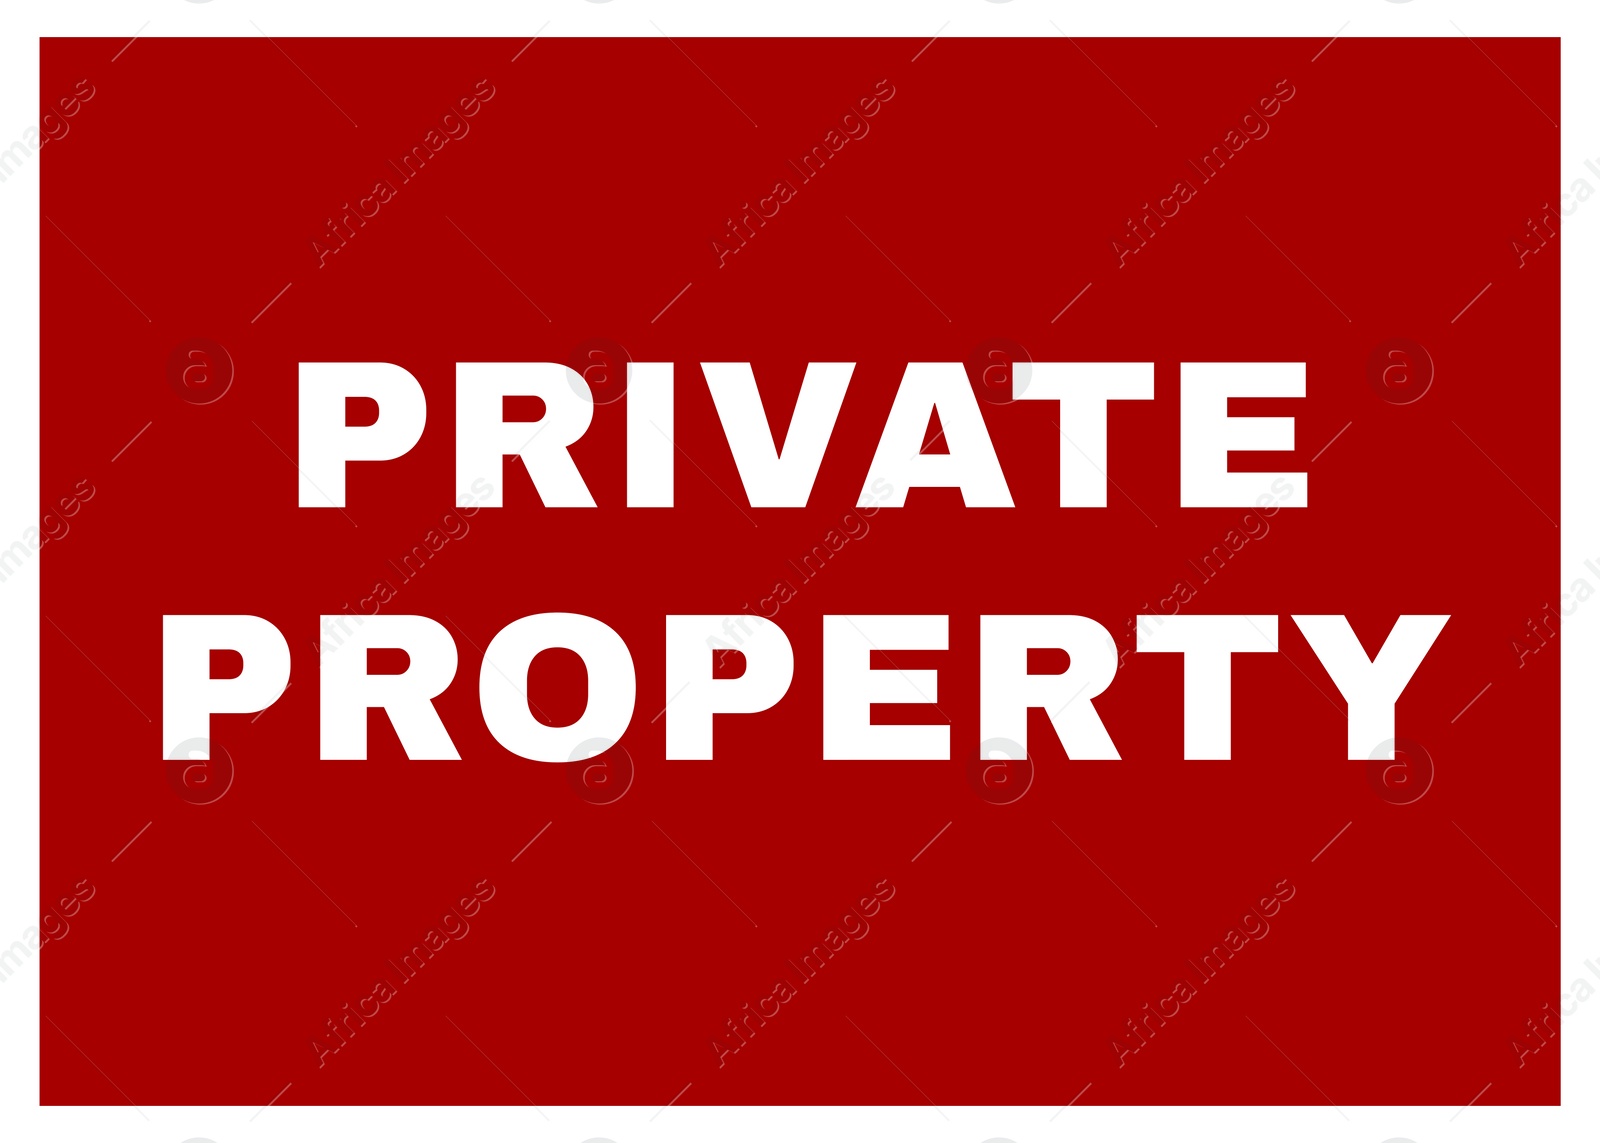 Illustration of Red and white sign with text Private Property